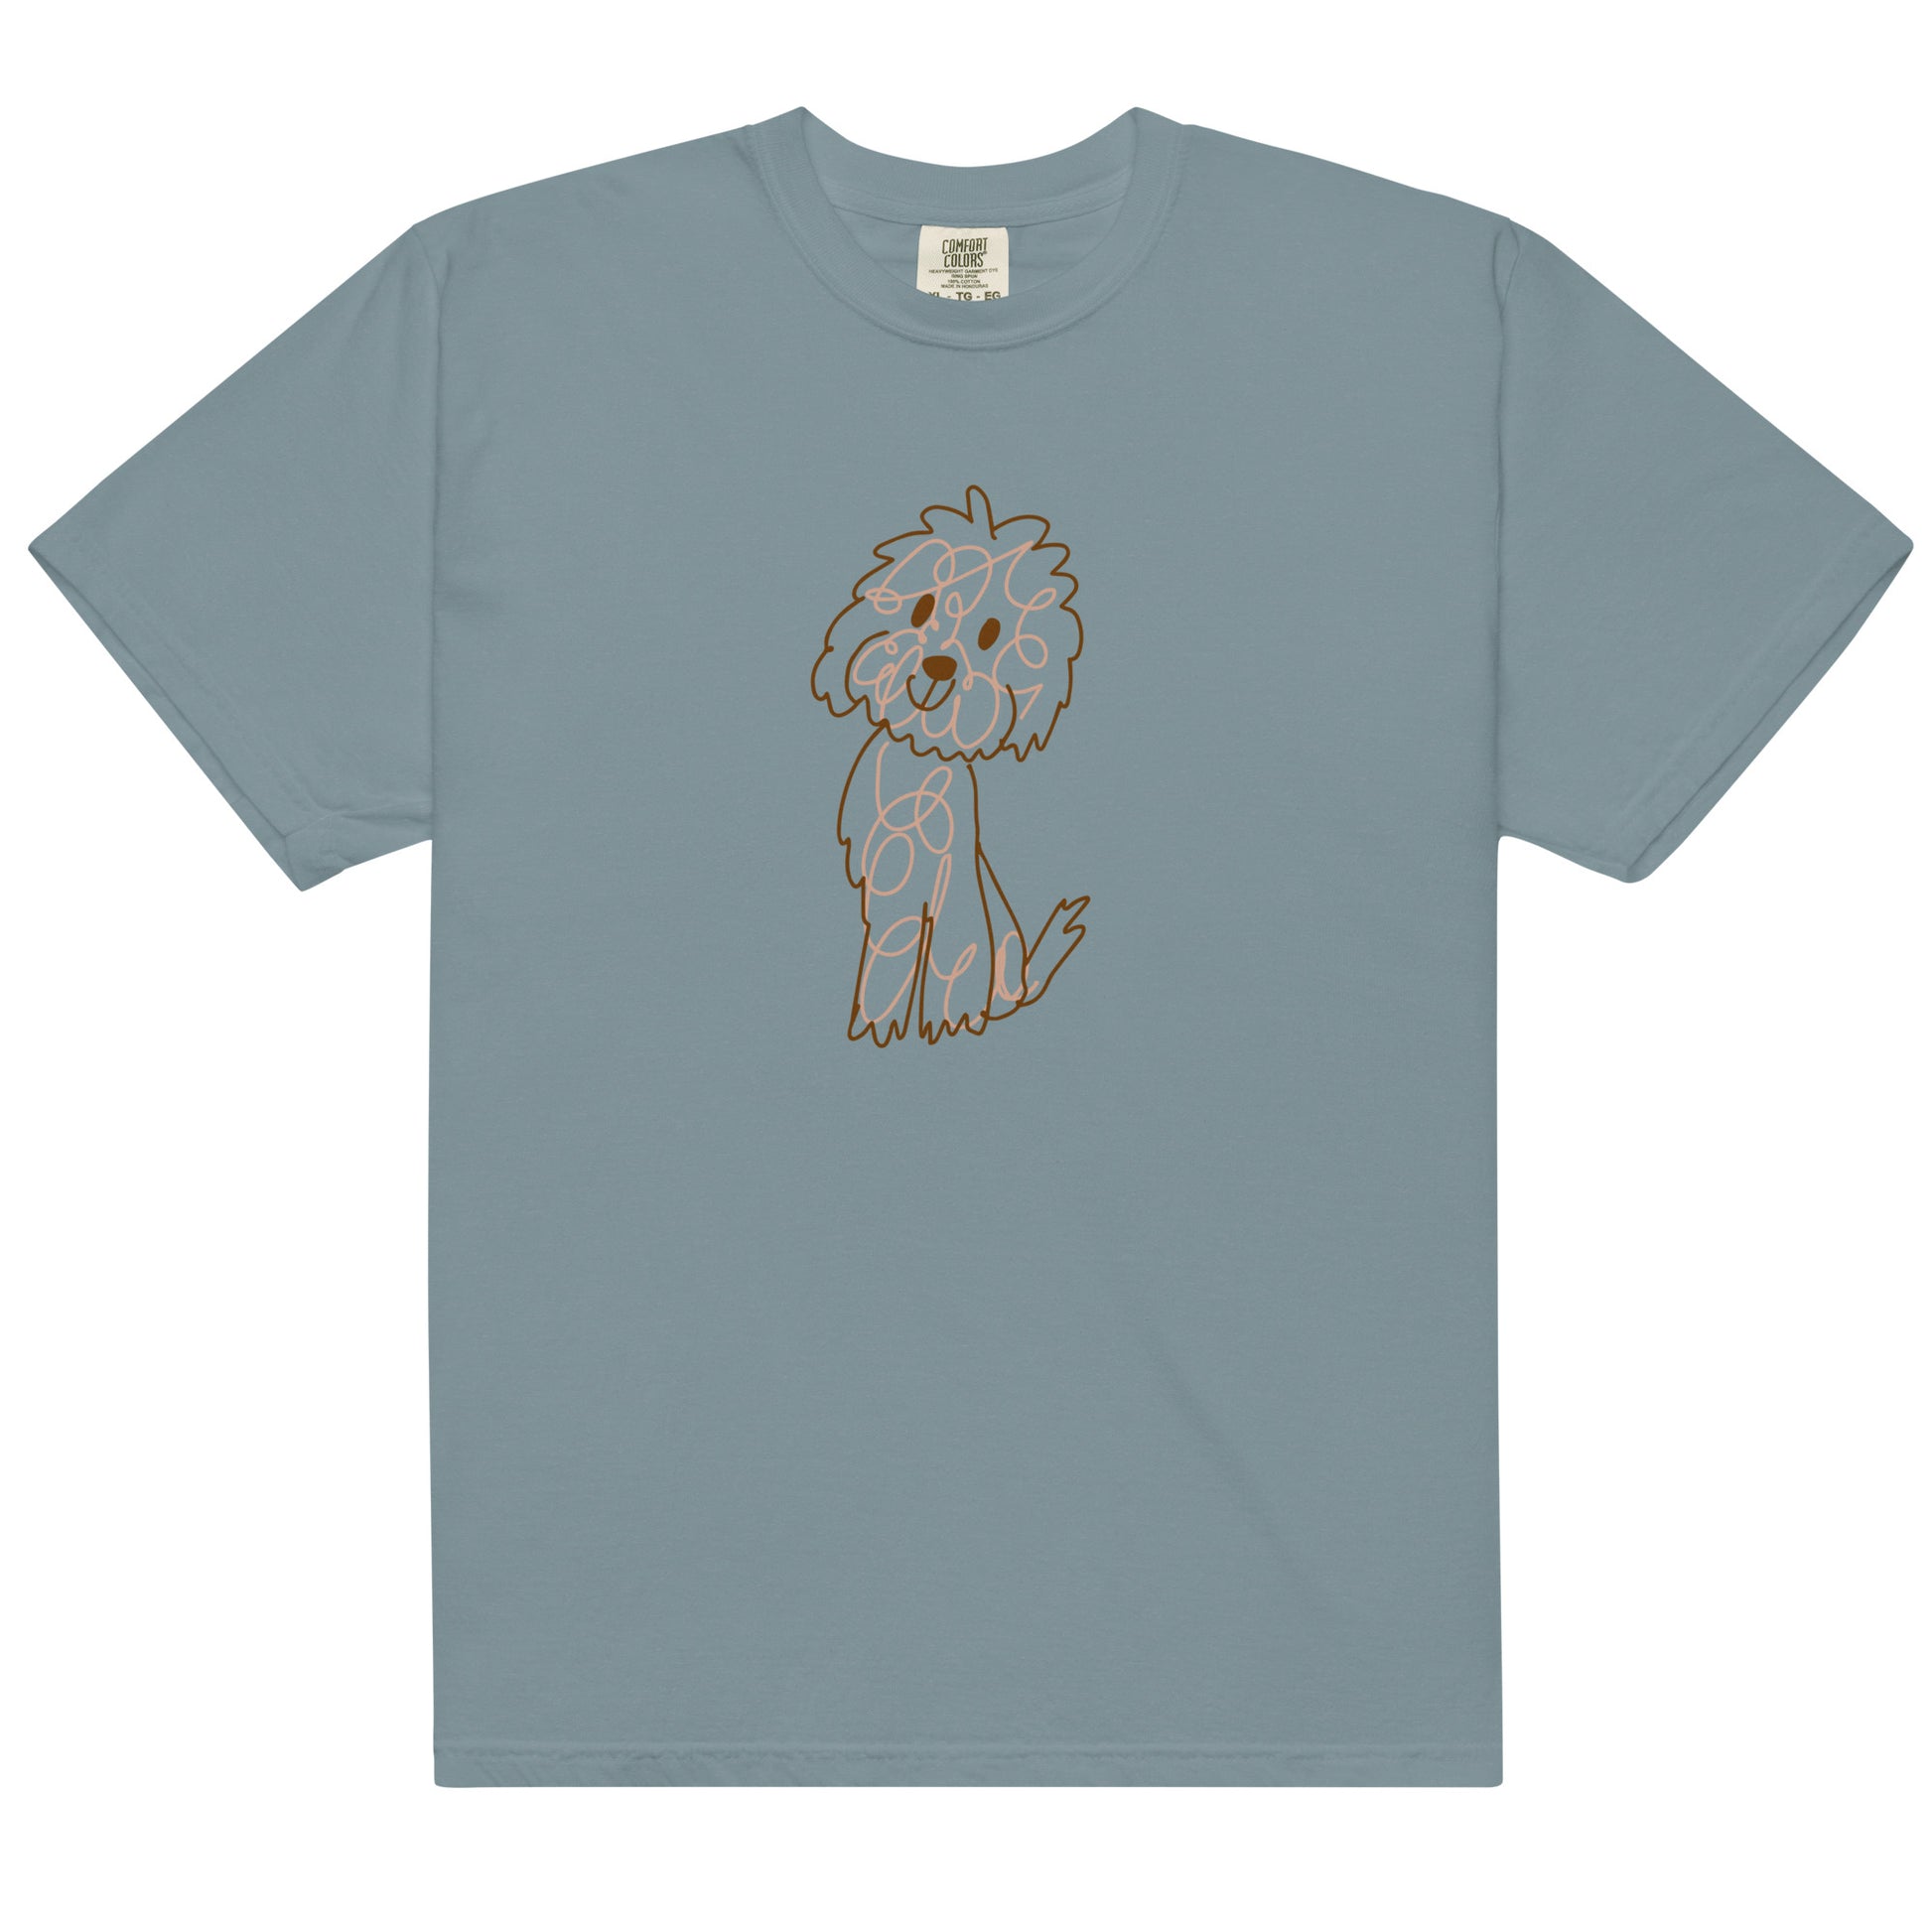 Comfort colors t-shirt with doodle dog drawn with fine lines ice blue color